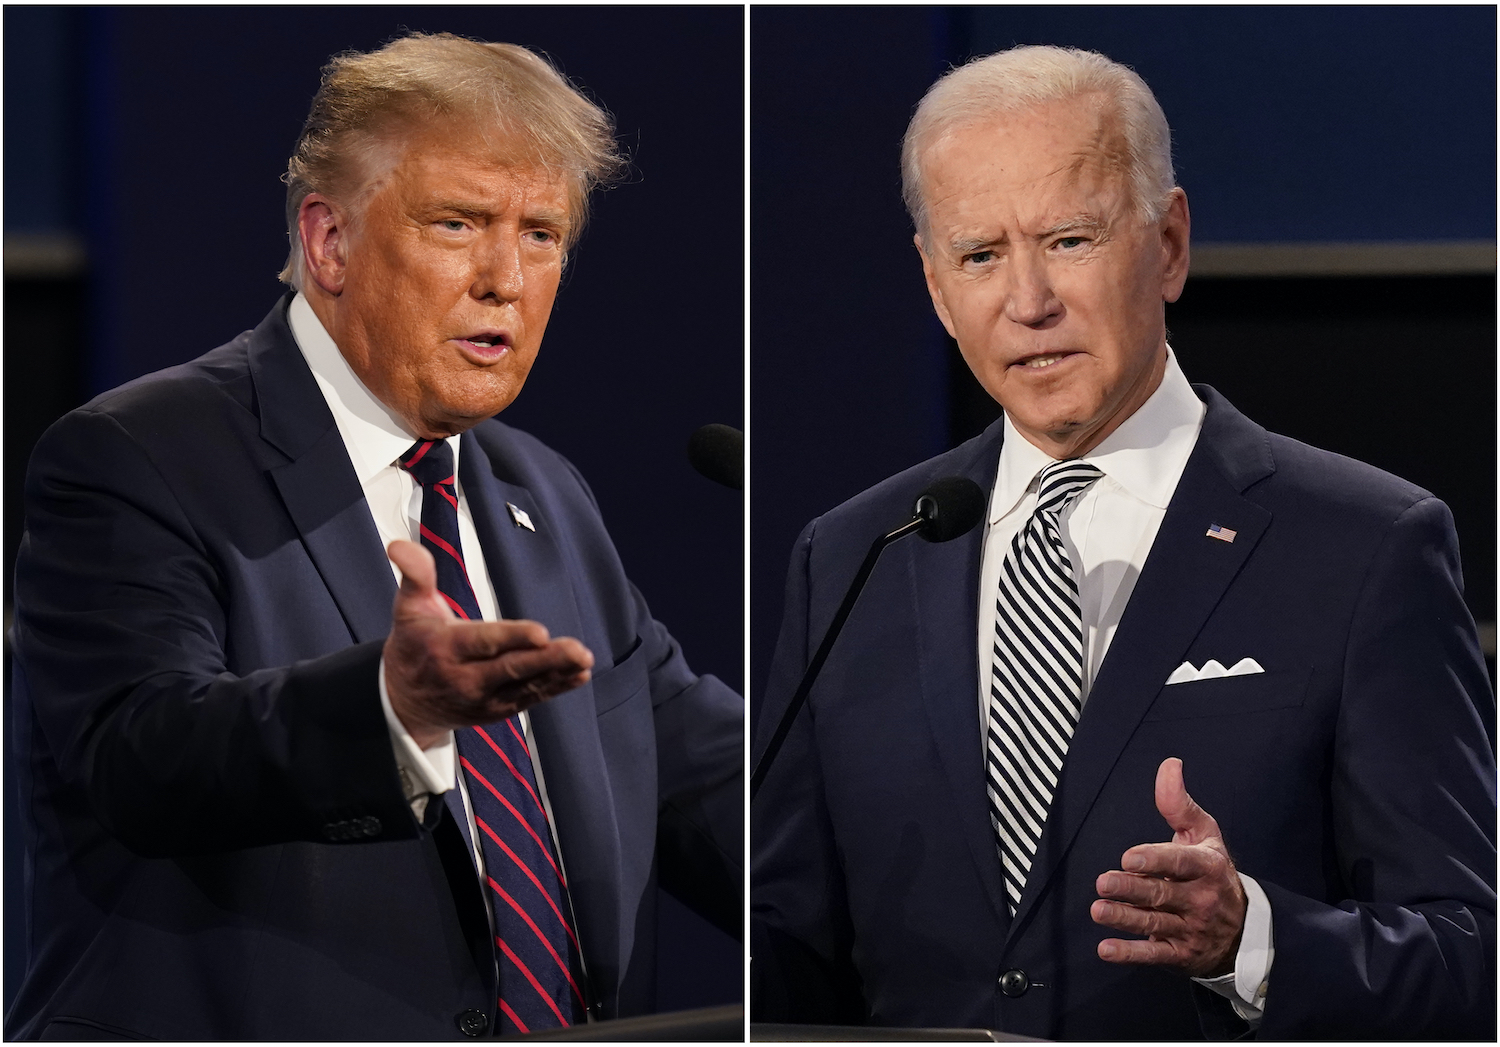 With presidency in balance, Trump v. Biden is now the election we all  feared (opinion) - silive.com